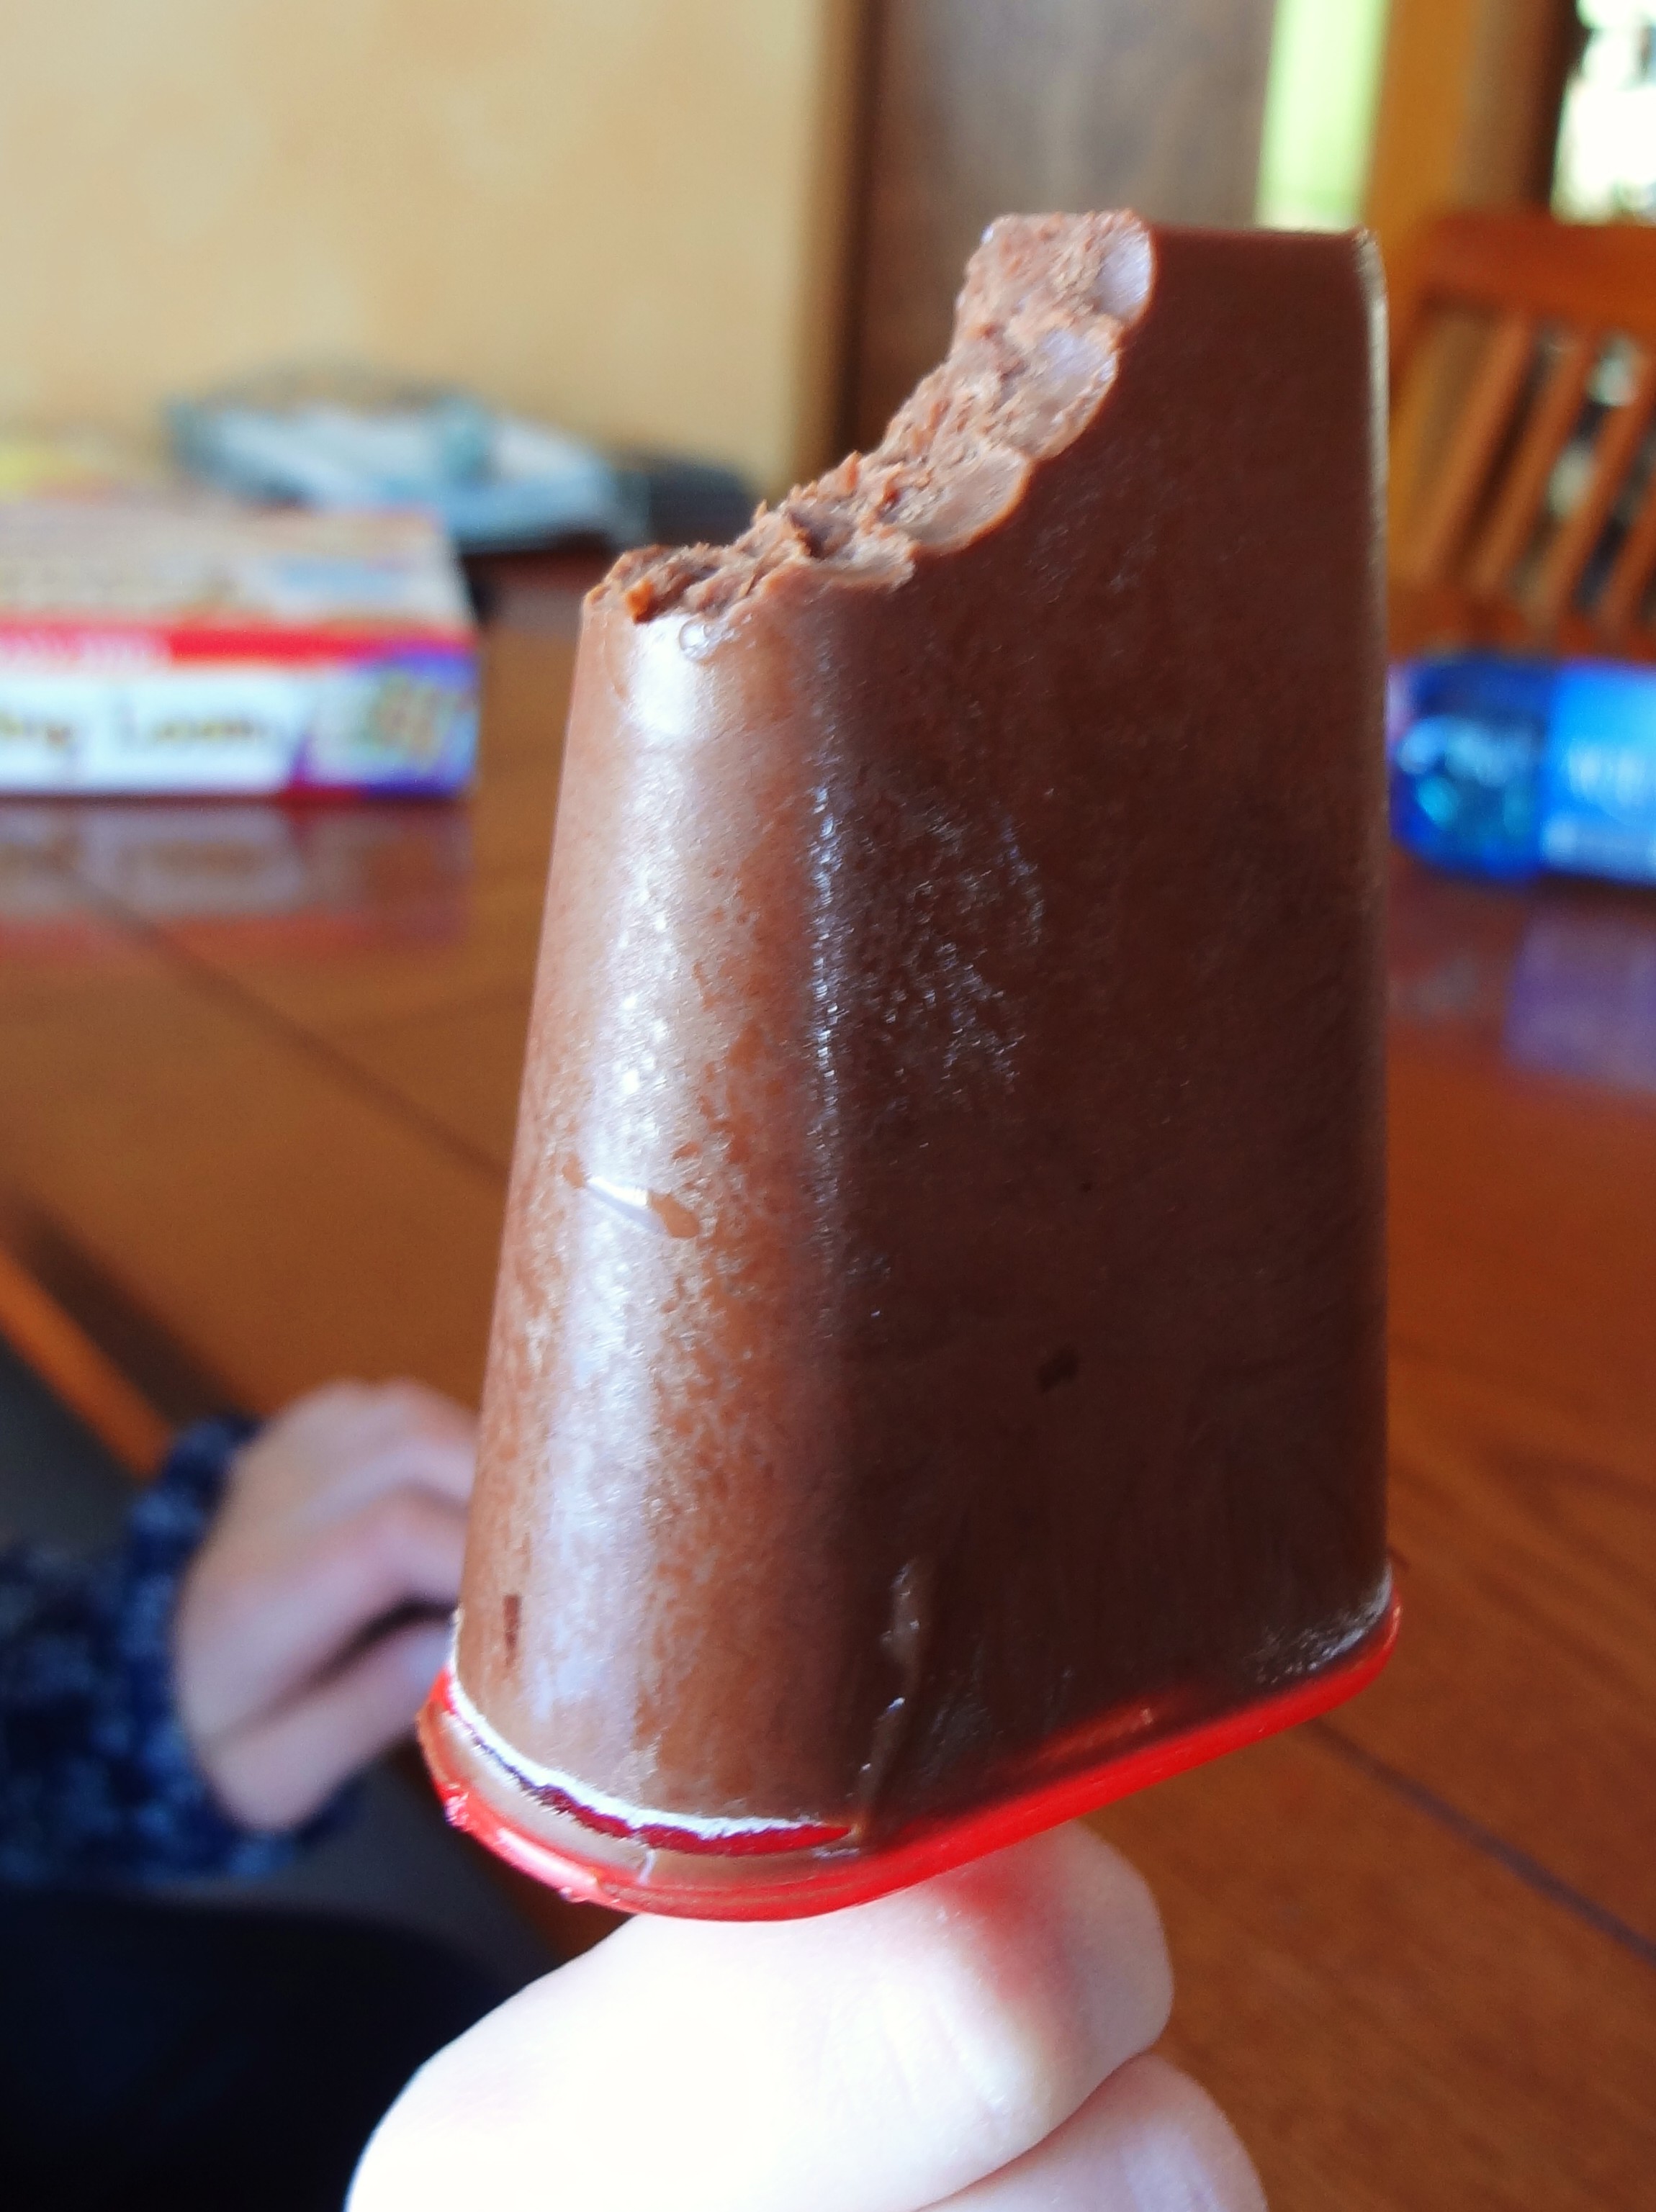 Craving a chocolatey frozen treat? Make these dairy free, soy free, and peanut free Dark Chocolate Popsicles (aka Fudgesicles) for a cool treat that's healthier than store-bought - @TheFitCookie #dairyfree #grainfree #glutenfree #popsicles